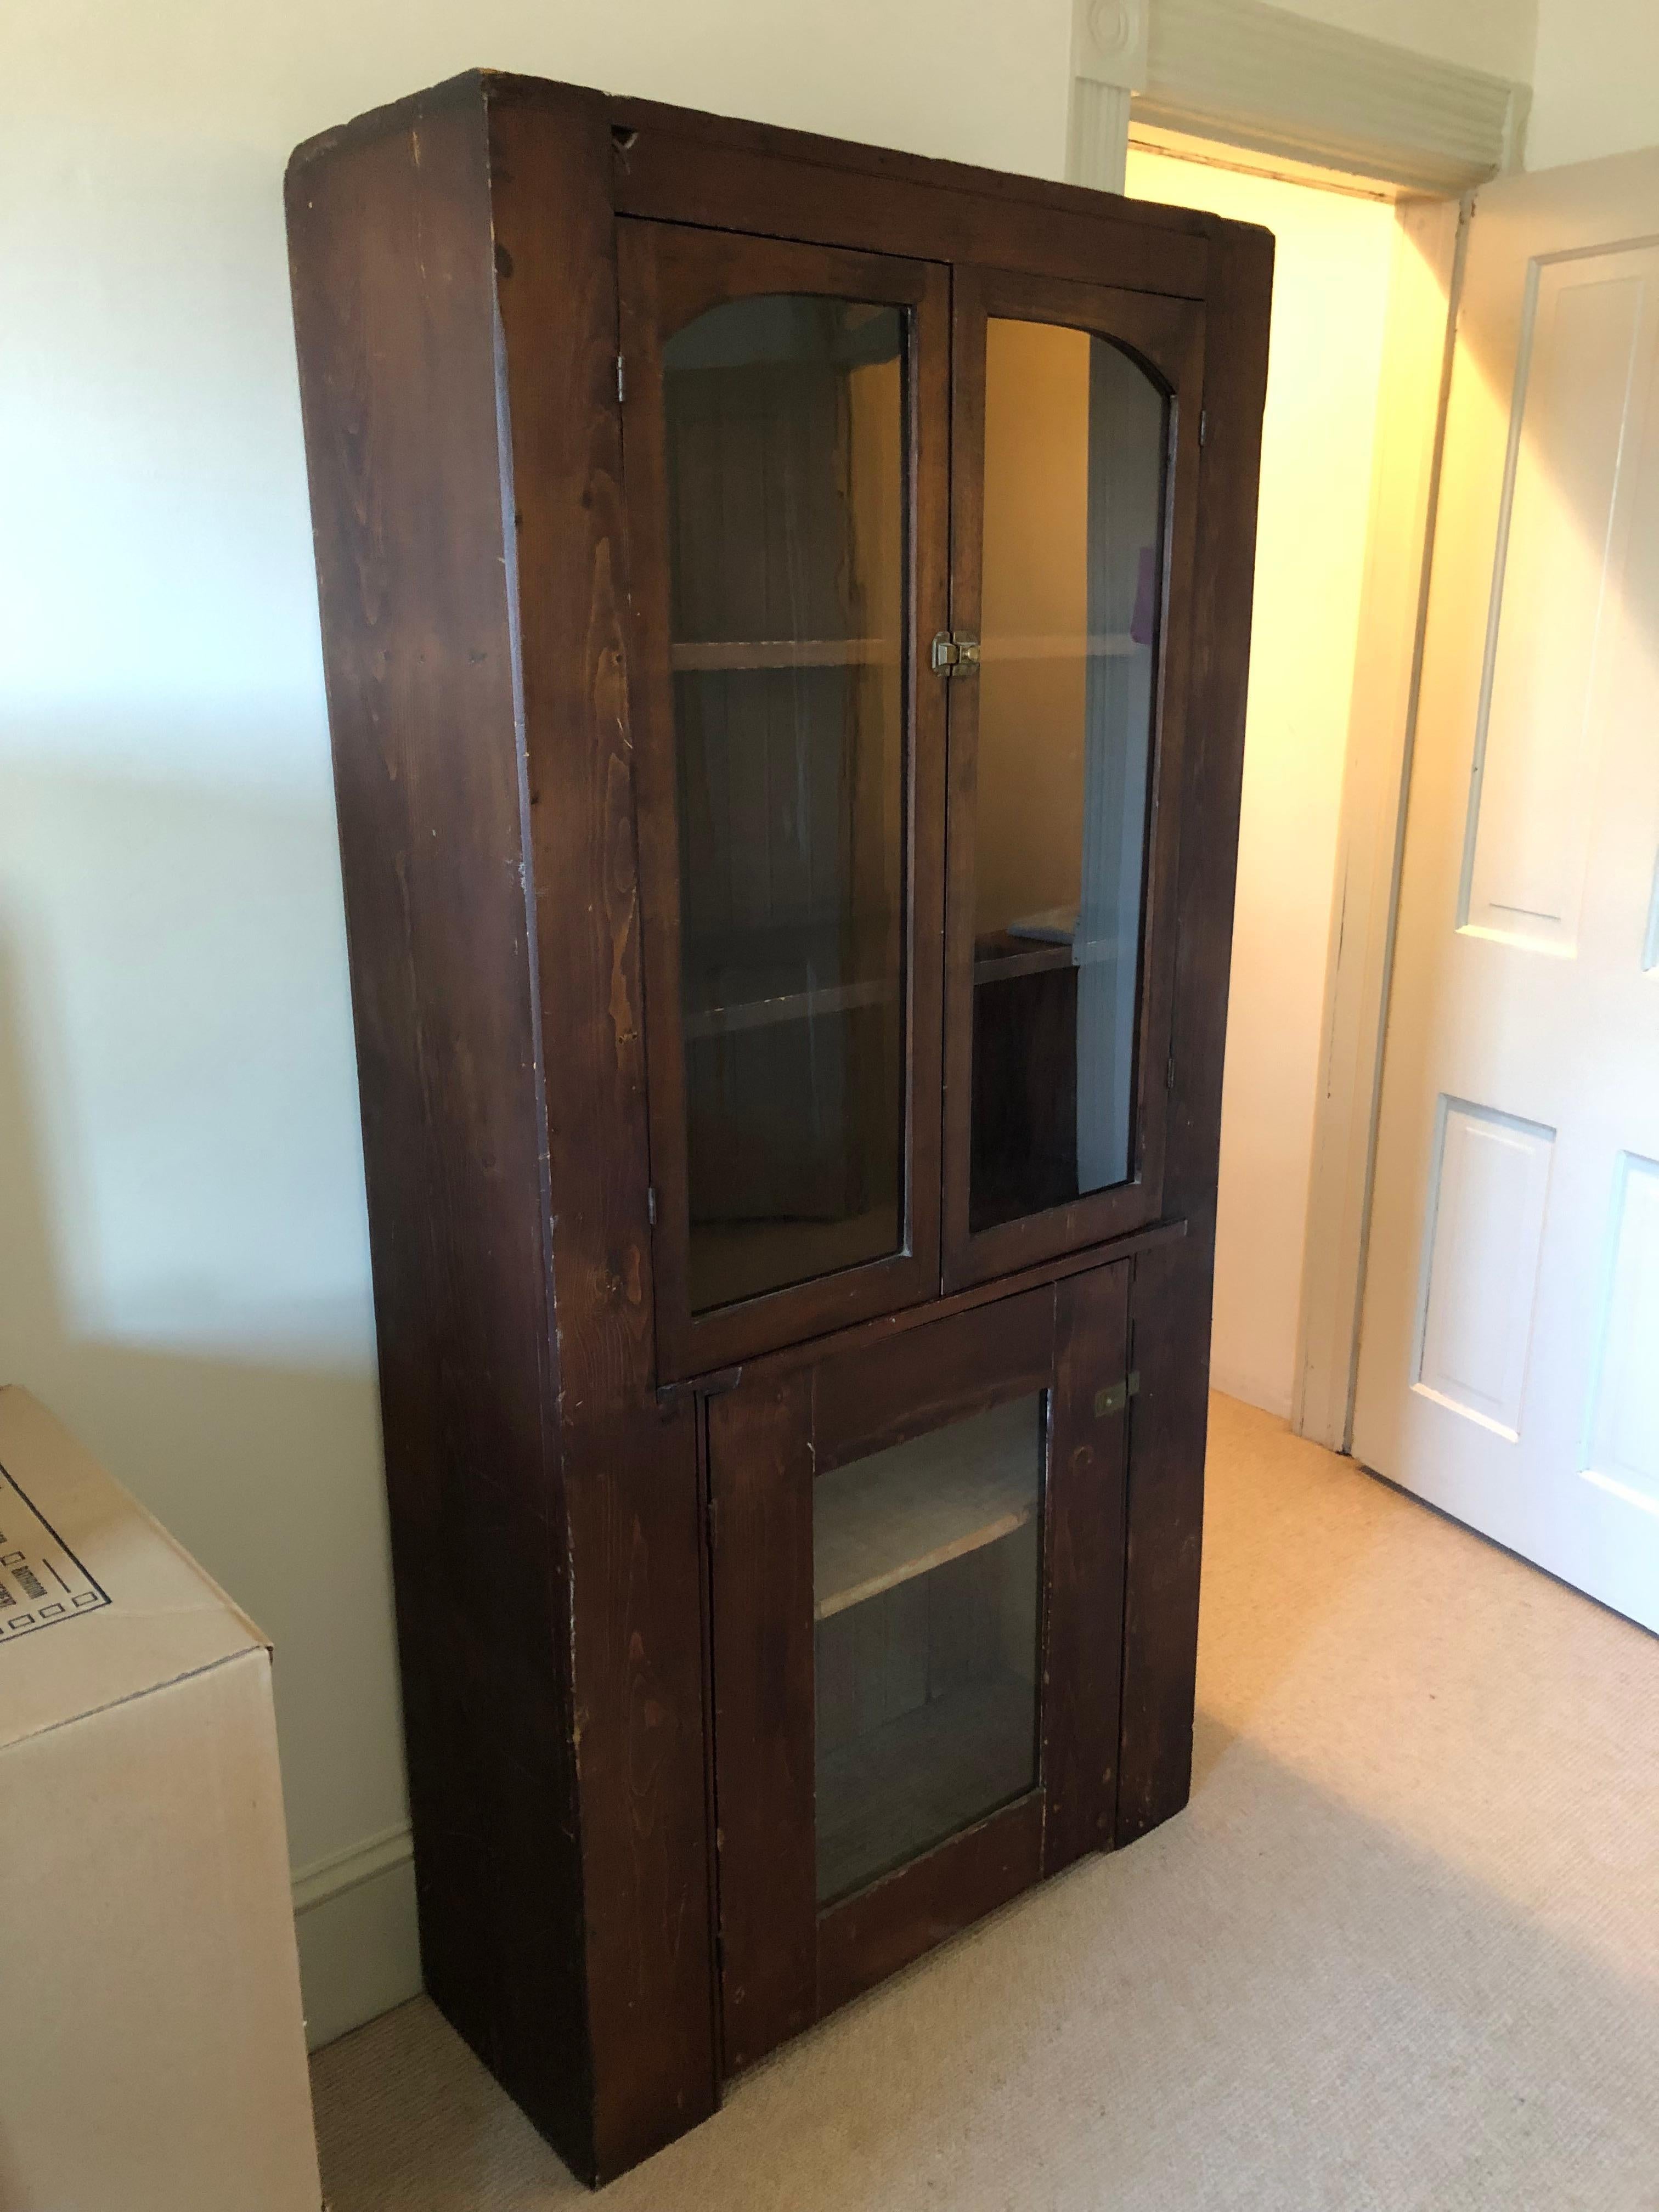 Rich with character, a country style stained wood cabinet having top with two glass doors that open to an interior with 2 shelves that are 11.5 w. 
Bottom has wooden framed single door with glass and interior single shelf. Interior of bottom